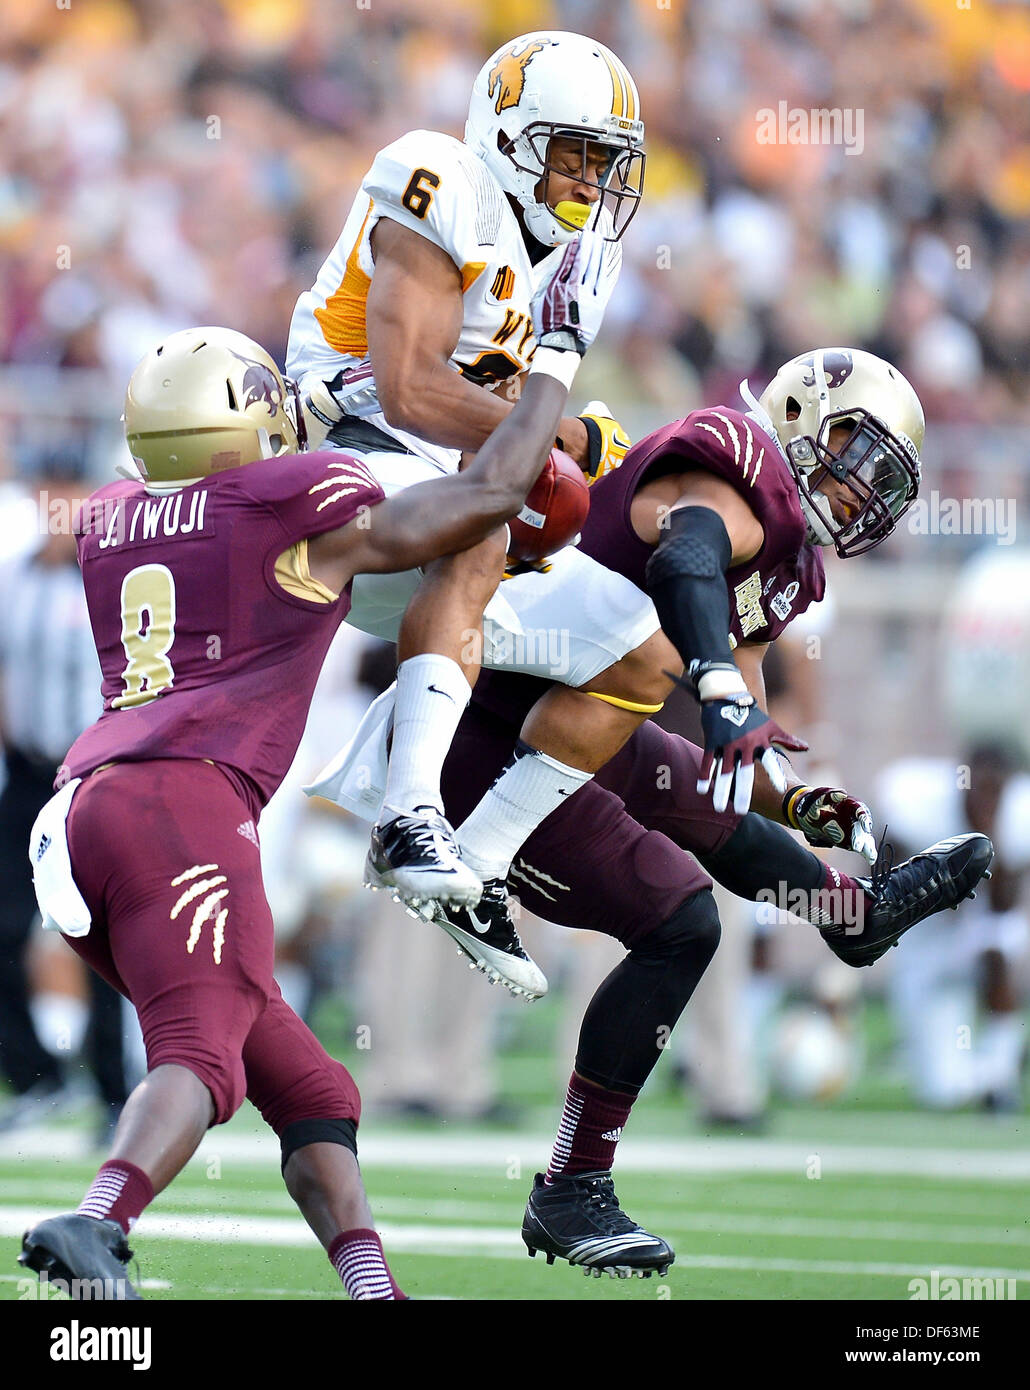 San Marcos, TX, USA. 28th Sep, 2013. Texas State safety Justin Iwuji #8 breaks a pass intended for Wyoming wide receiver Robert Herron #6 during NCAA football game at Jim Wacker Field in San Marcos, TX. Texas State defeat Wyoming 42-21. © csm/Alamy Live News Stock Photo